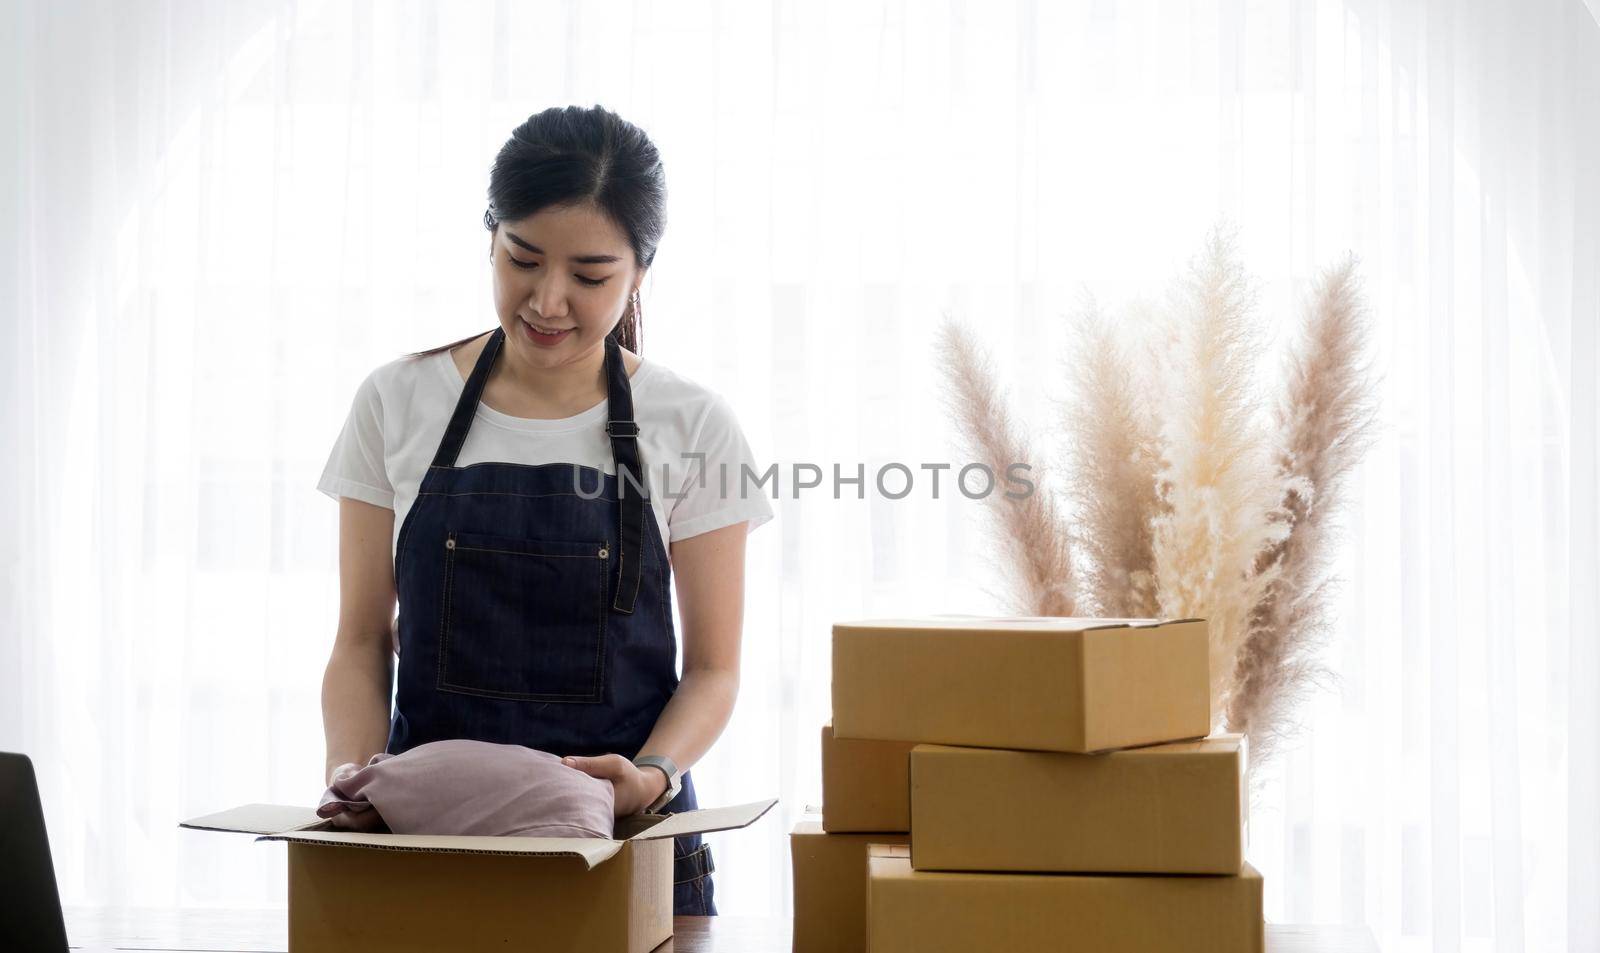 Startup small business entrepreneur SME, asian woman packing shirt in box. Portrait young Asian small business owner home office, online sell marketing delivery, SME e-commerce telemarket job concept.